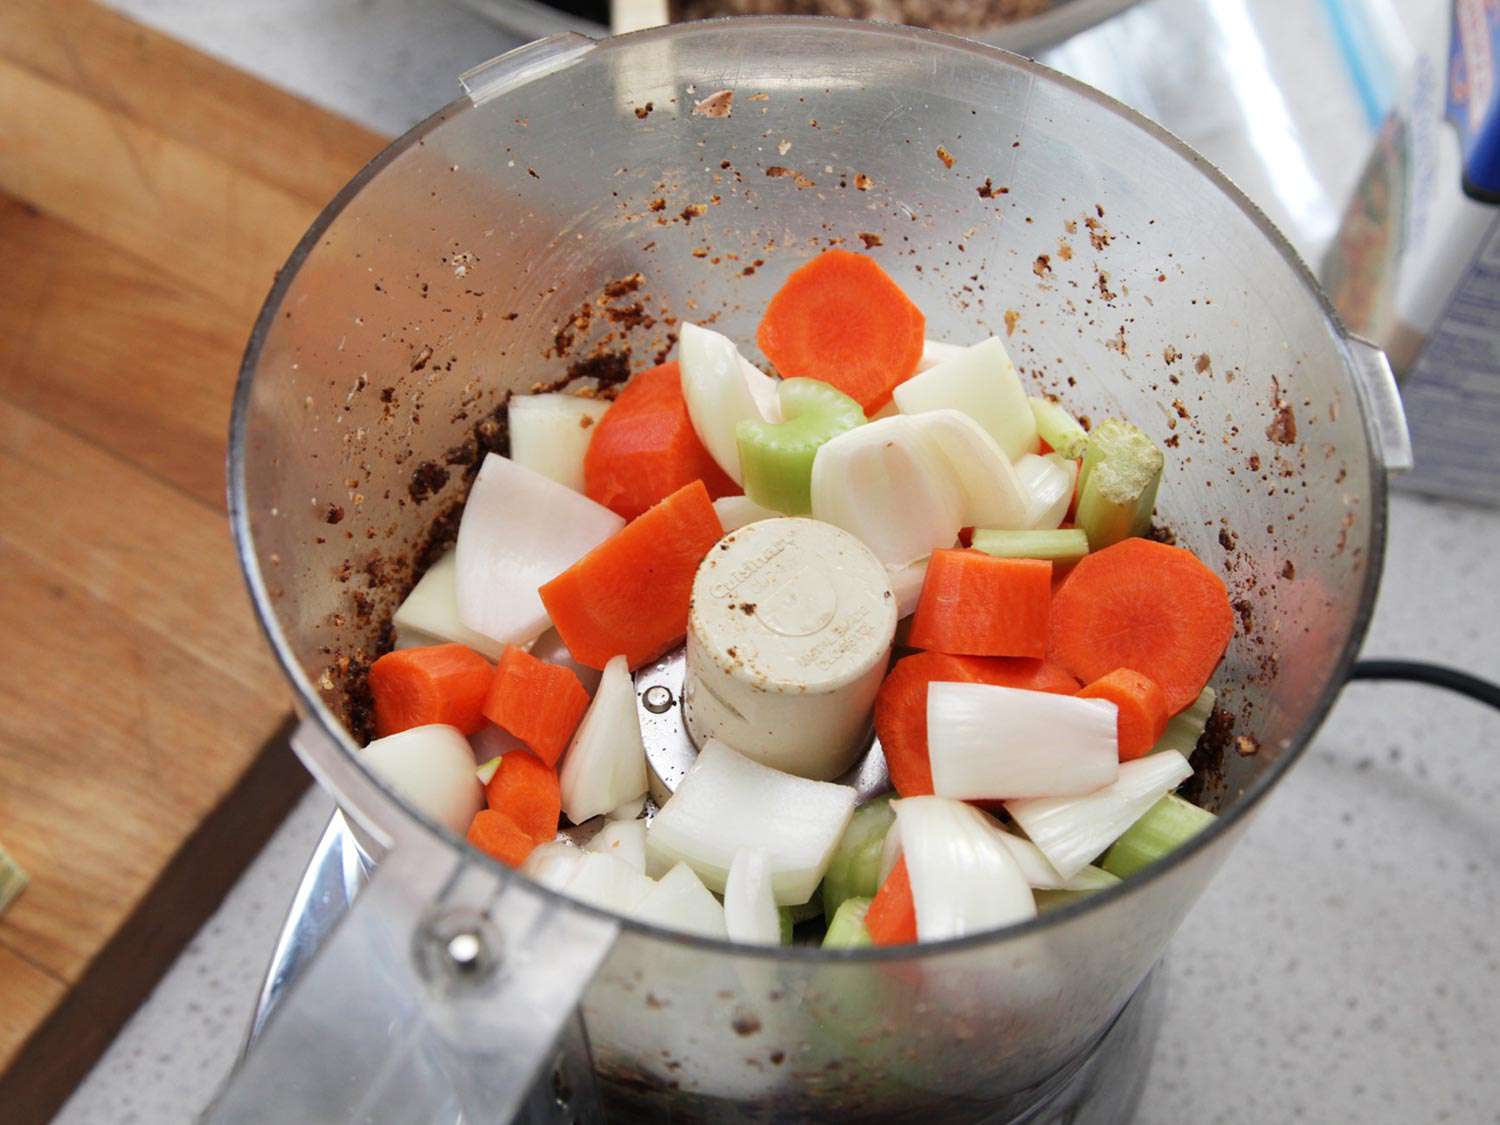 Onion, celery, and carrots in food processor bowl